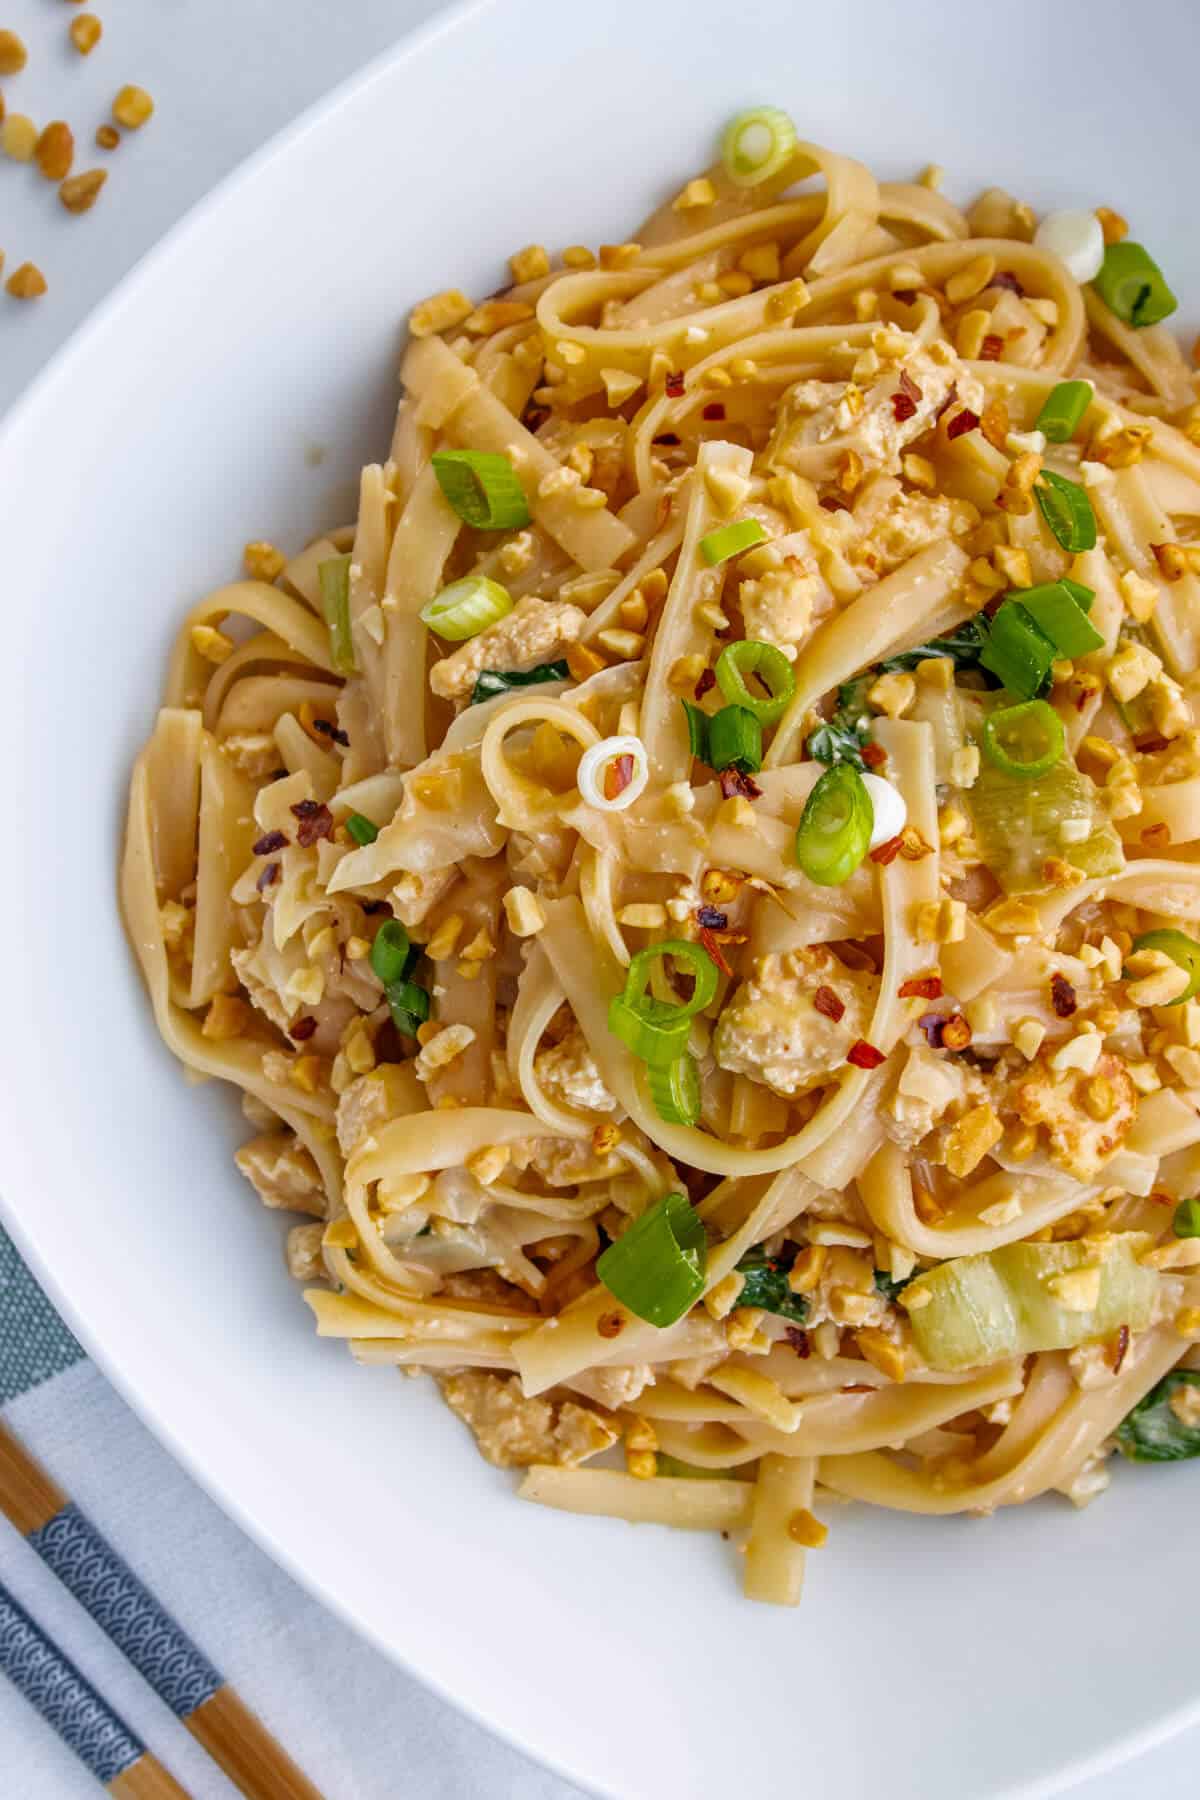 Peanut noodles served with green onions and crushed peanuts